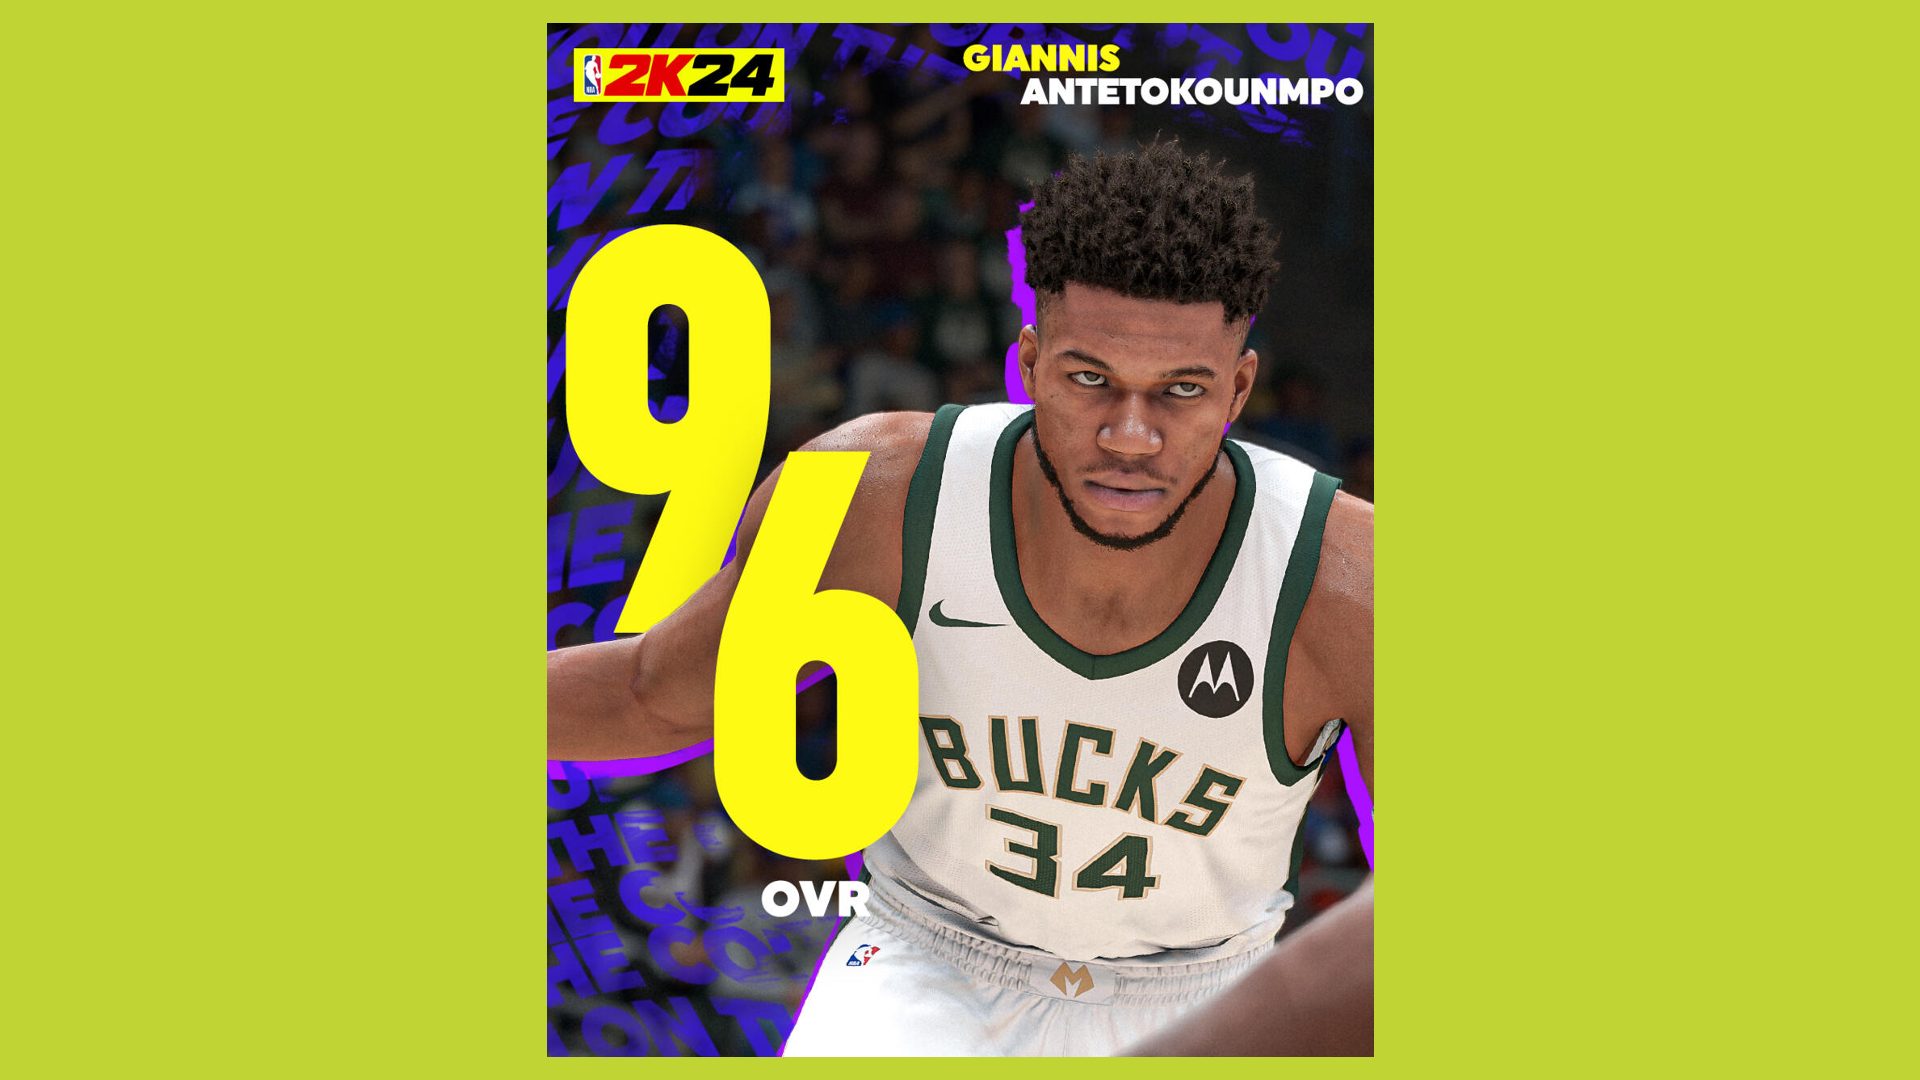 Tim Thomas has been one of the best MyTeam players in NBA 2K23